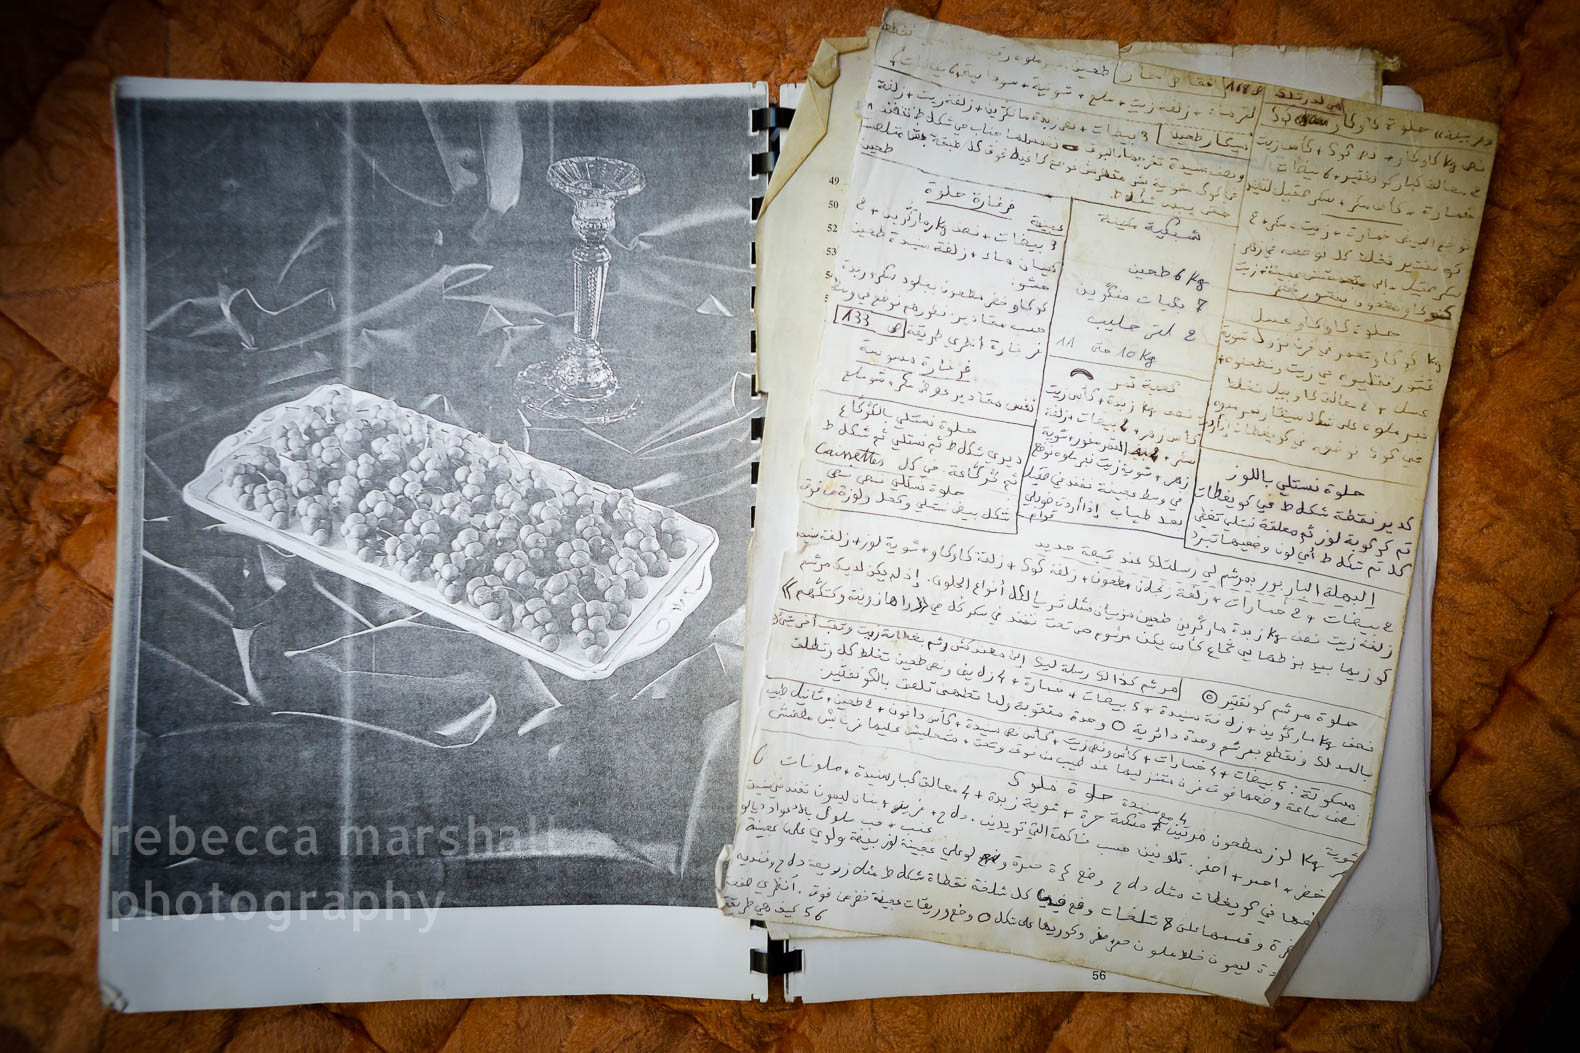 Photograph of an old cookery book, hand-written in Arabic